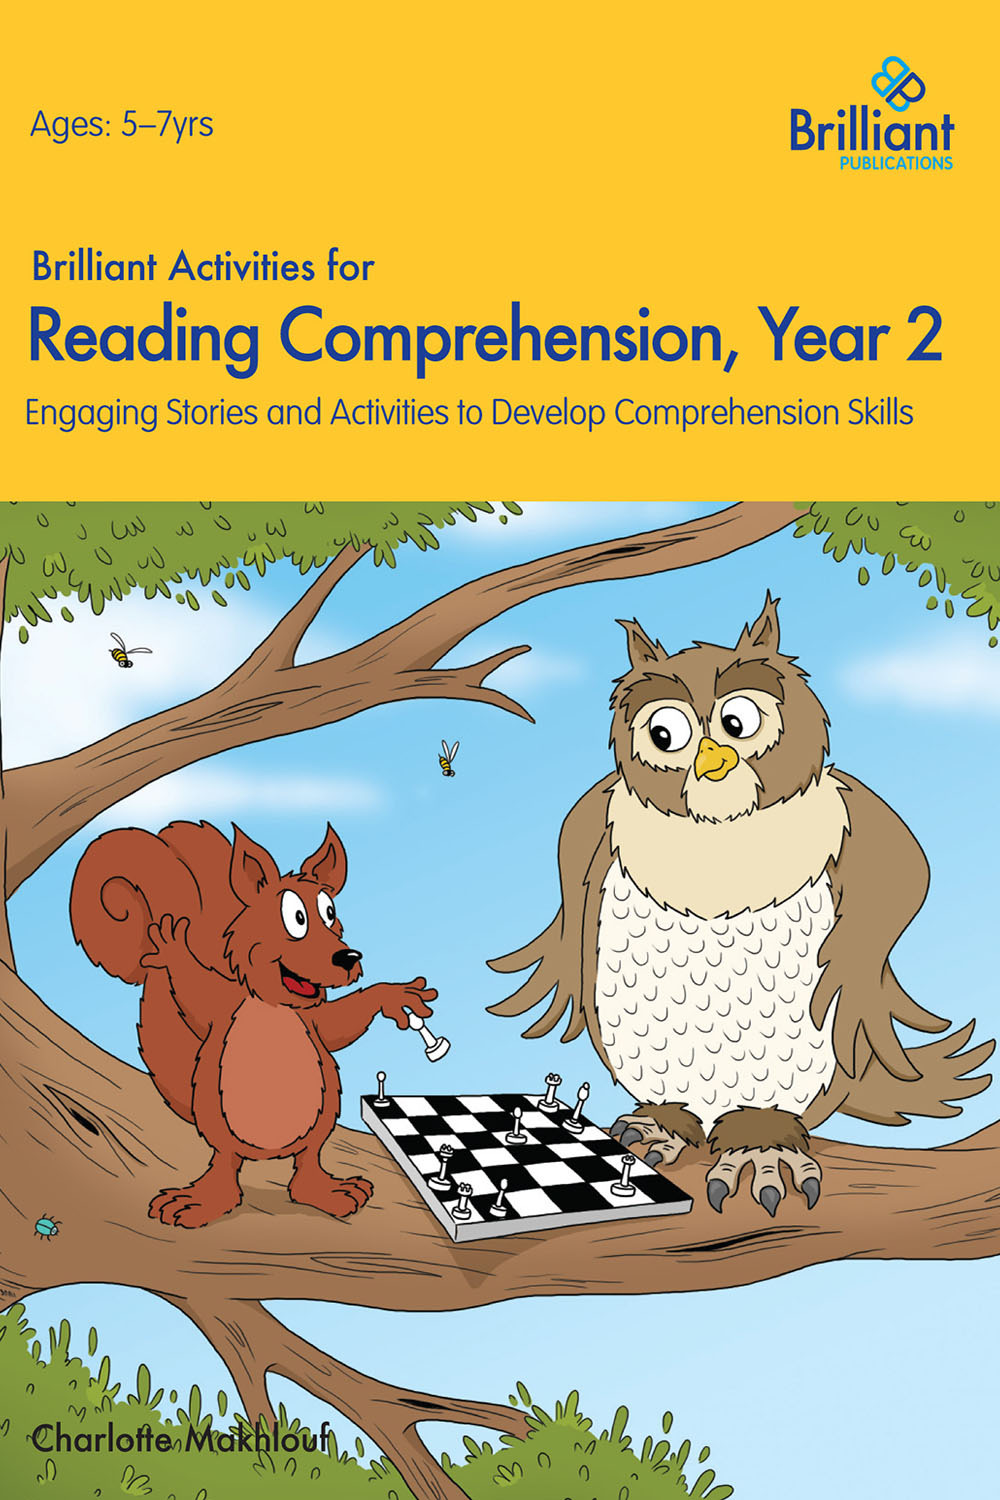 Makhlouf, Charlotte - Brilliant Activities for Reading Comprehension Year 2, ebook